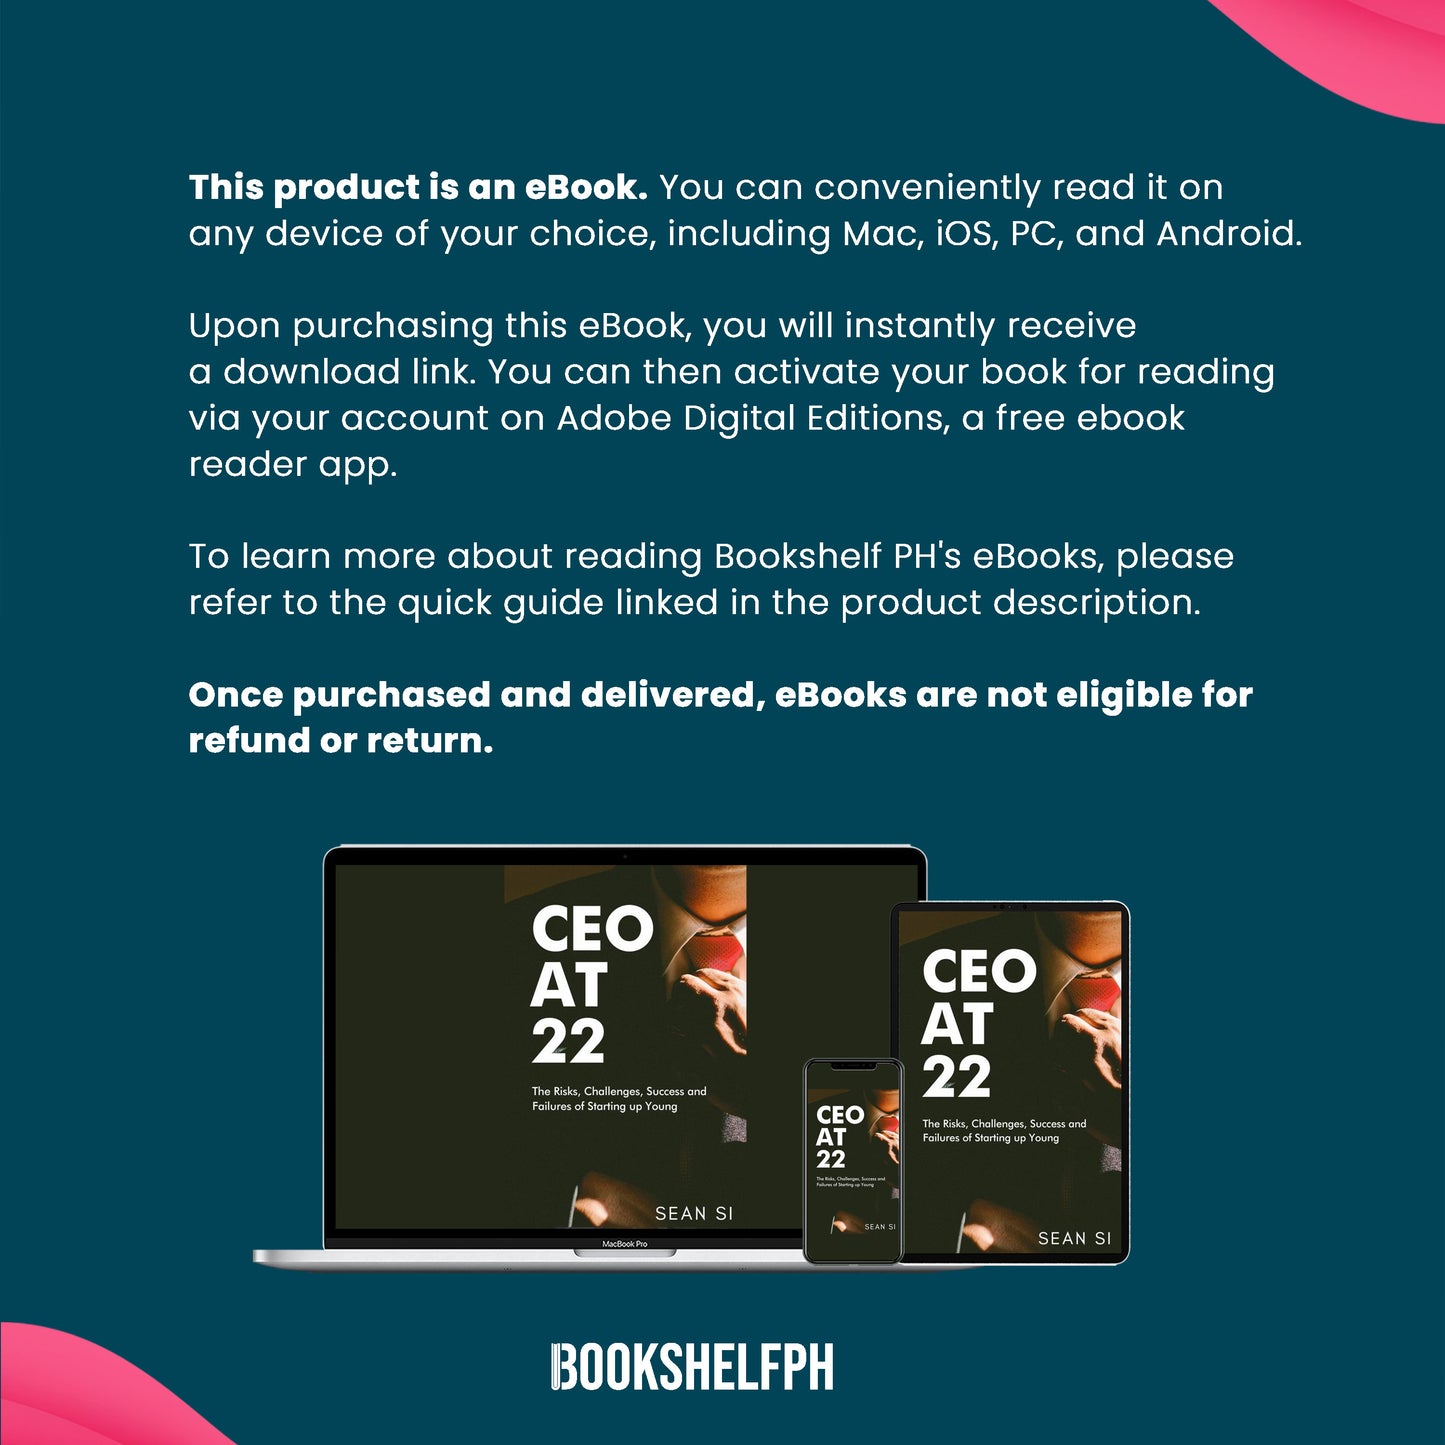 eBook - CEO at 22: The Risks, Challenges, Success and Failures of Starting up Young